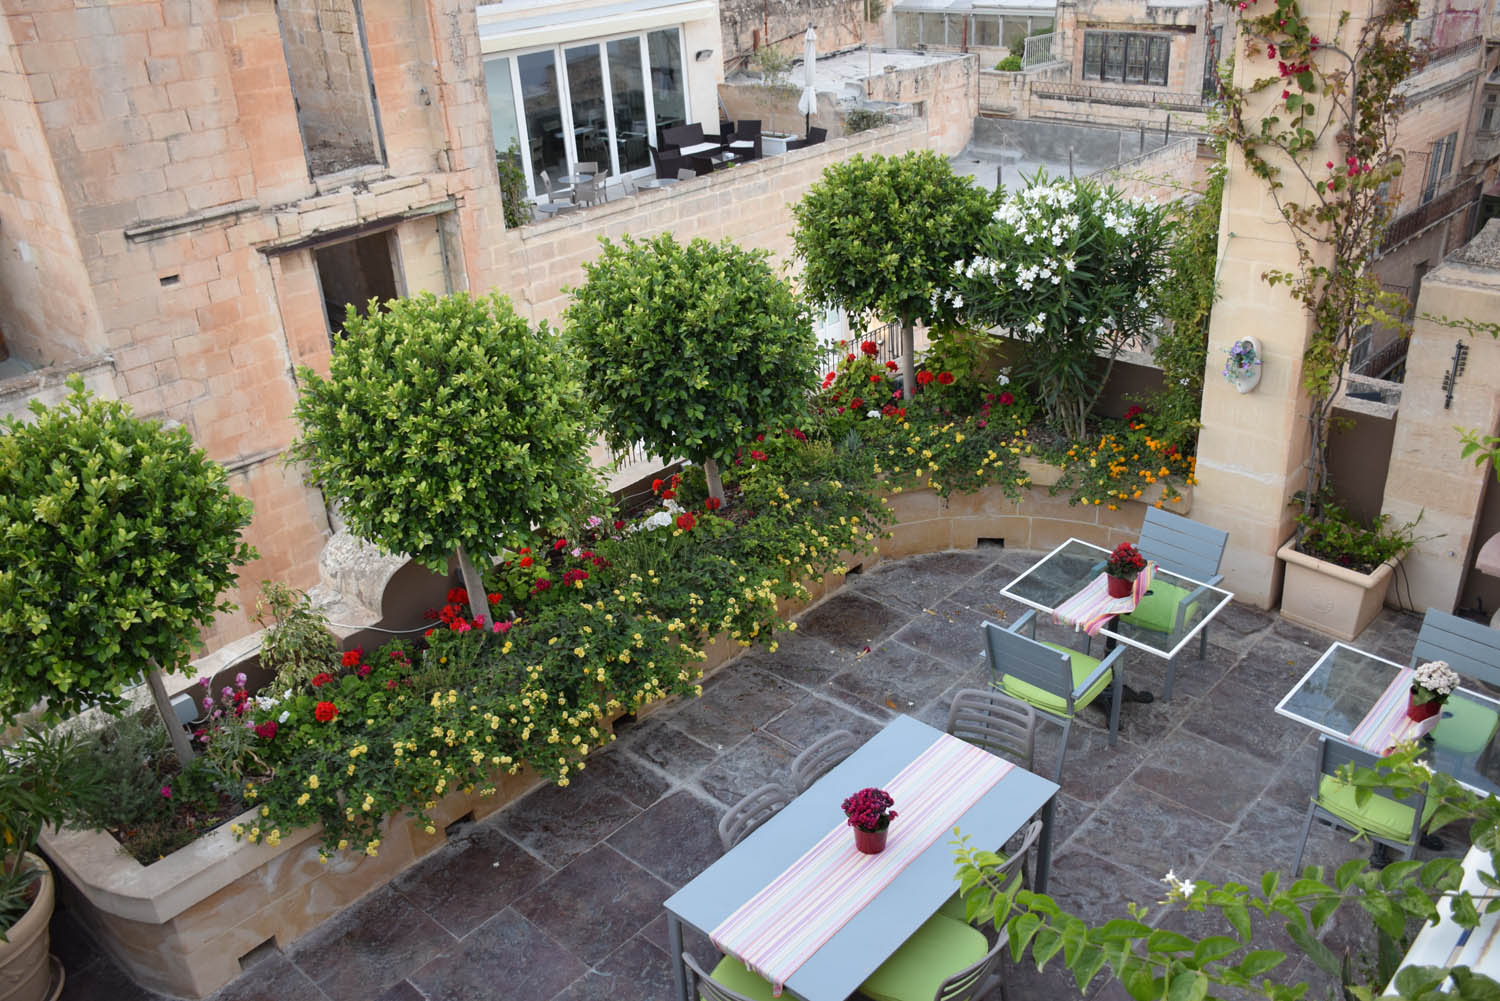 Coffee tables for guests on the rooftop |  Hotel Palazzo Prince d'Orange - Valletta - Malta